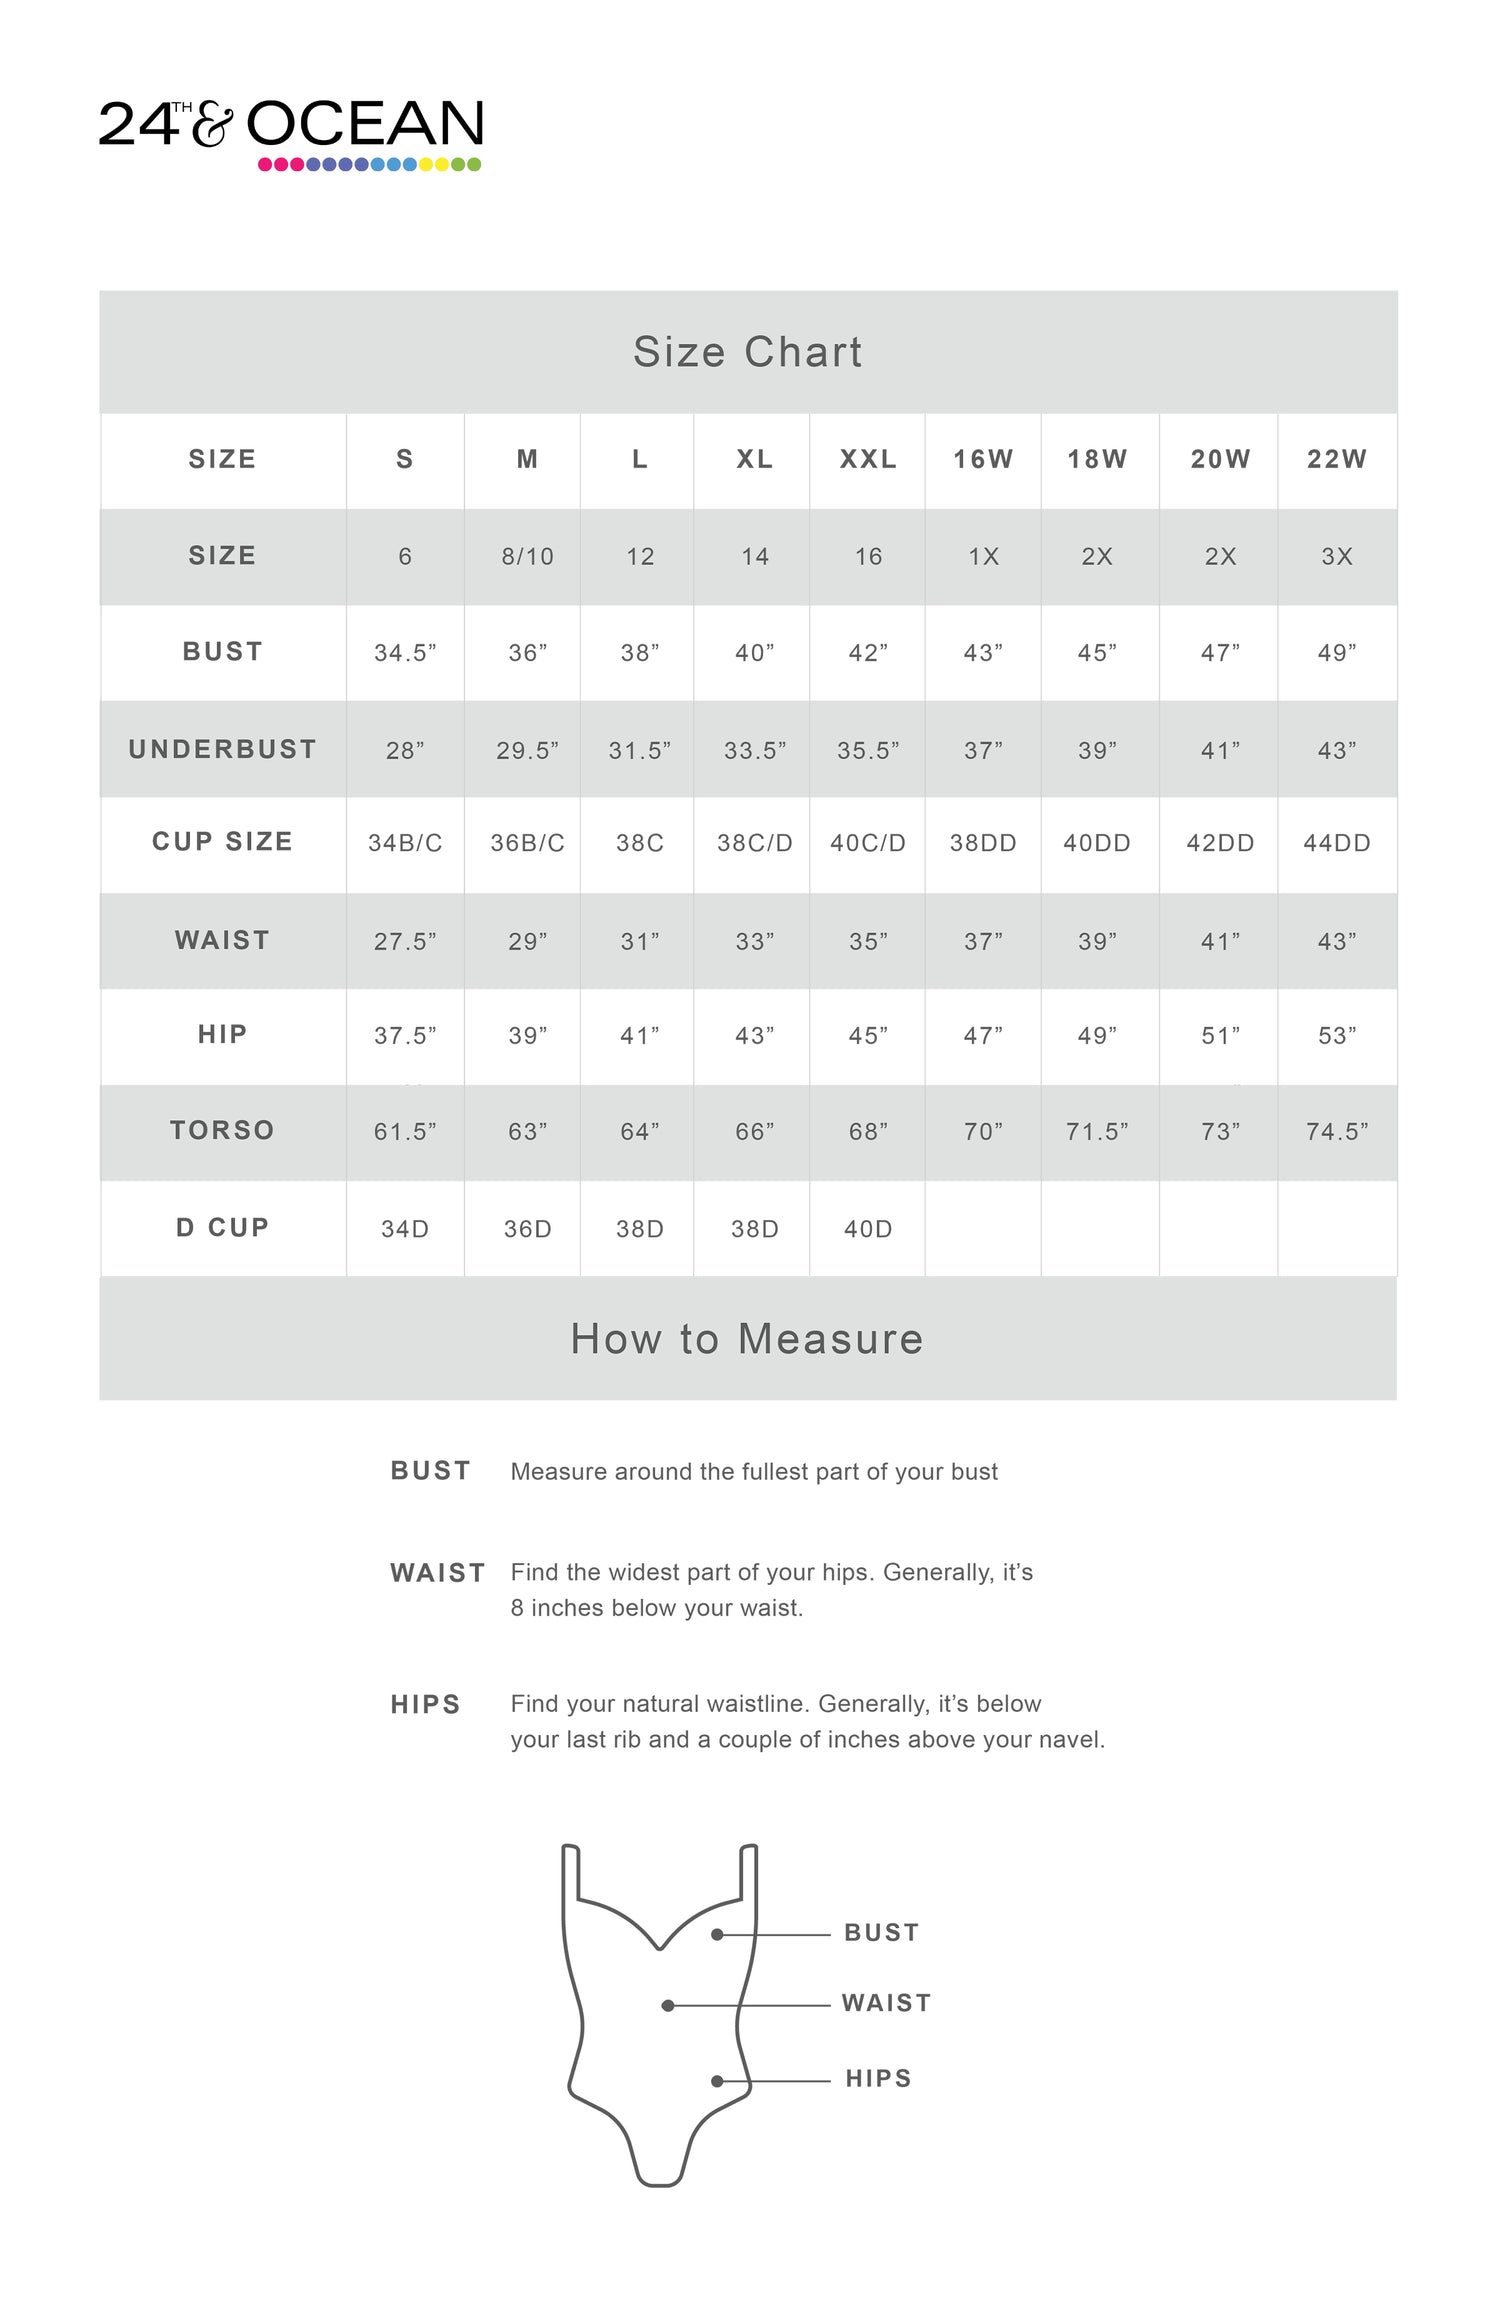 24th & Ocean Swimwear Size Chart and How to Measure Guide